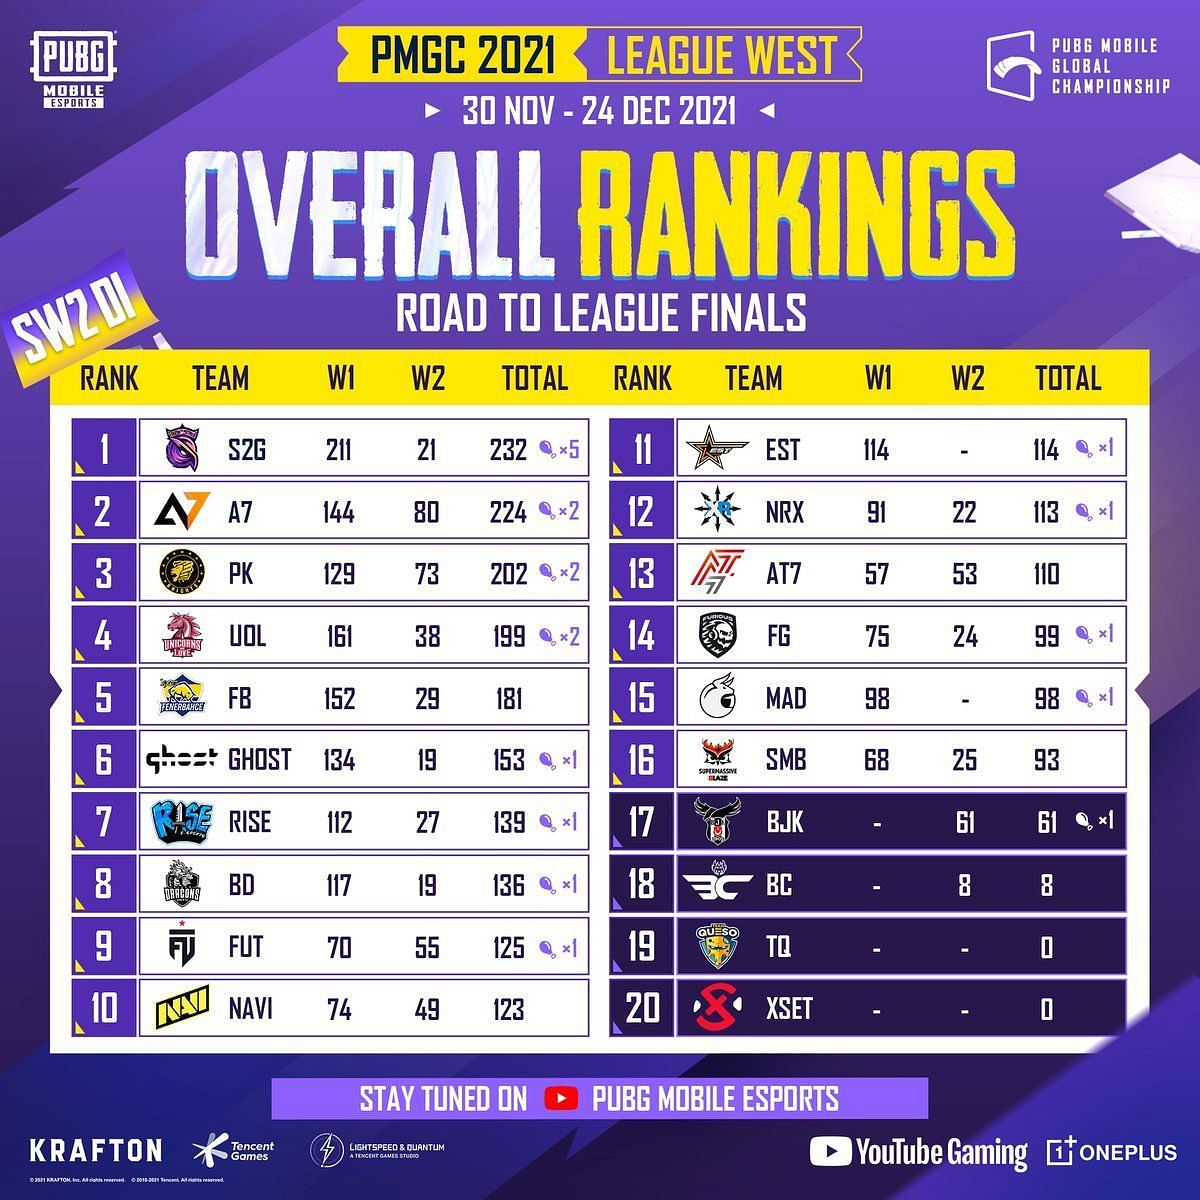 The PMGC 2021 League West standings after the Super Weekend 2 Day 1 (Image via PUBG Mobile)